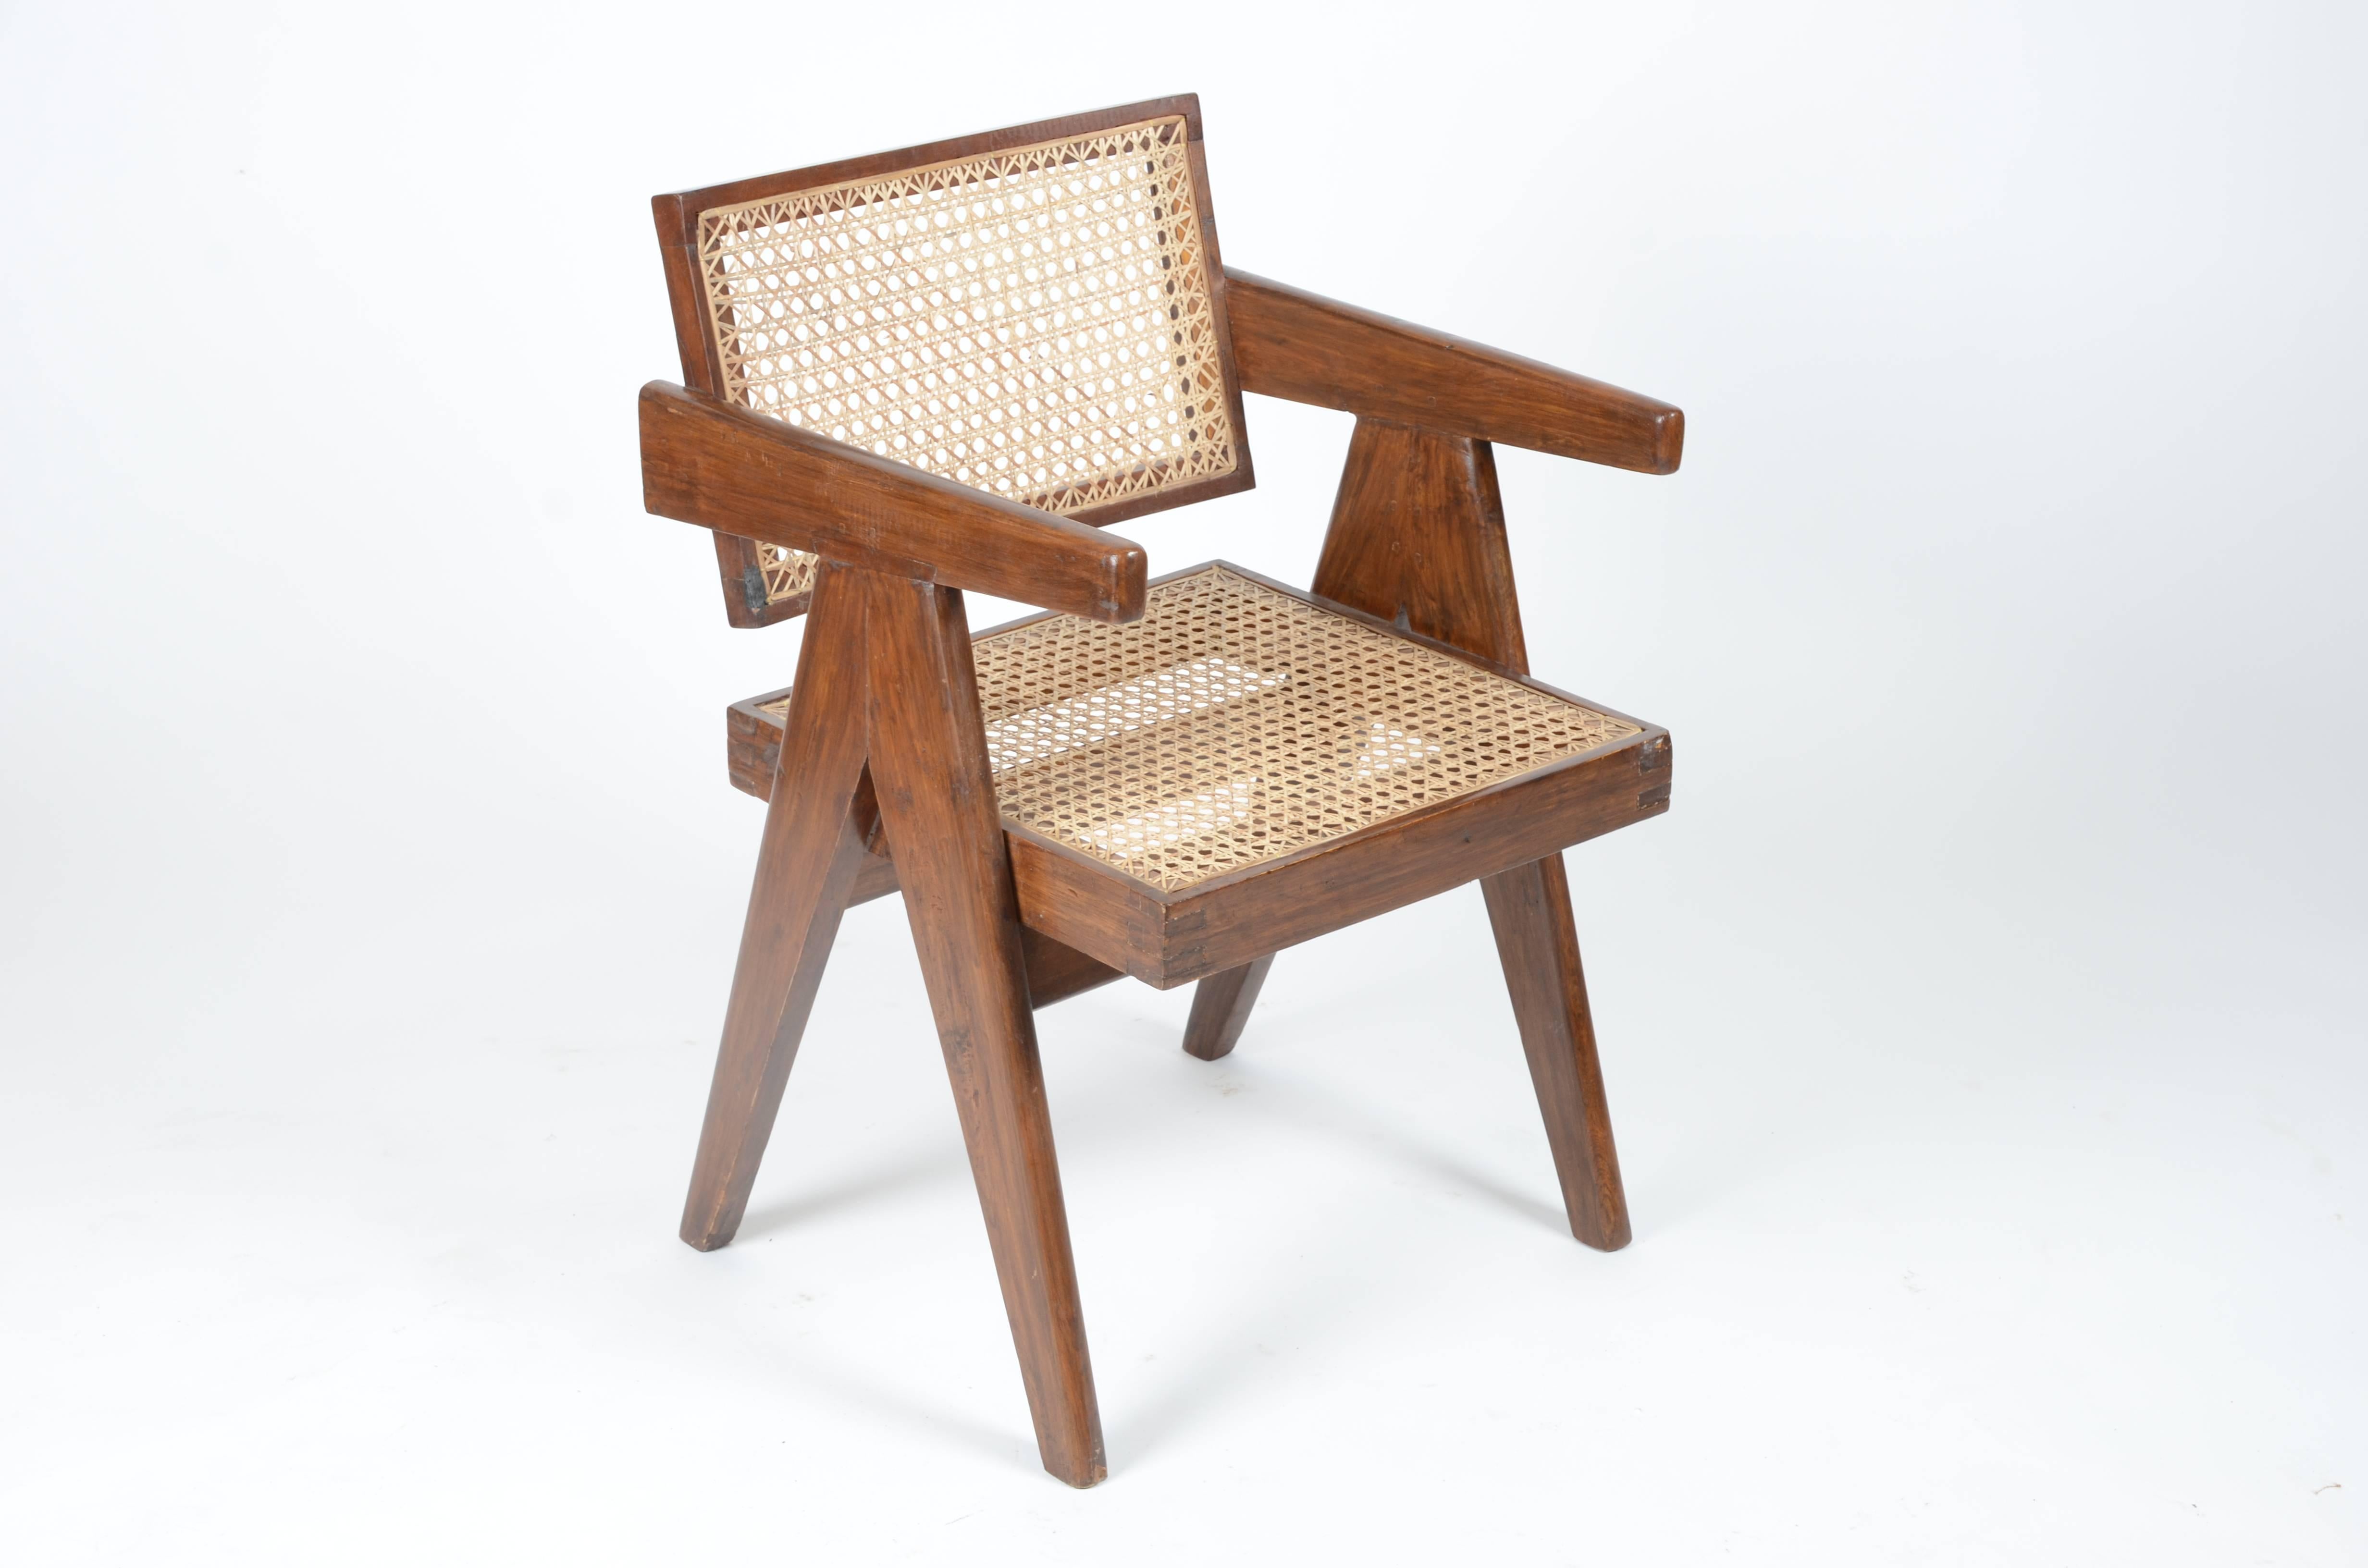 Indian Pierre Jeanneret, Desk and Chair, Chandigarh, India, 1950s